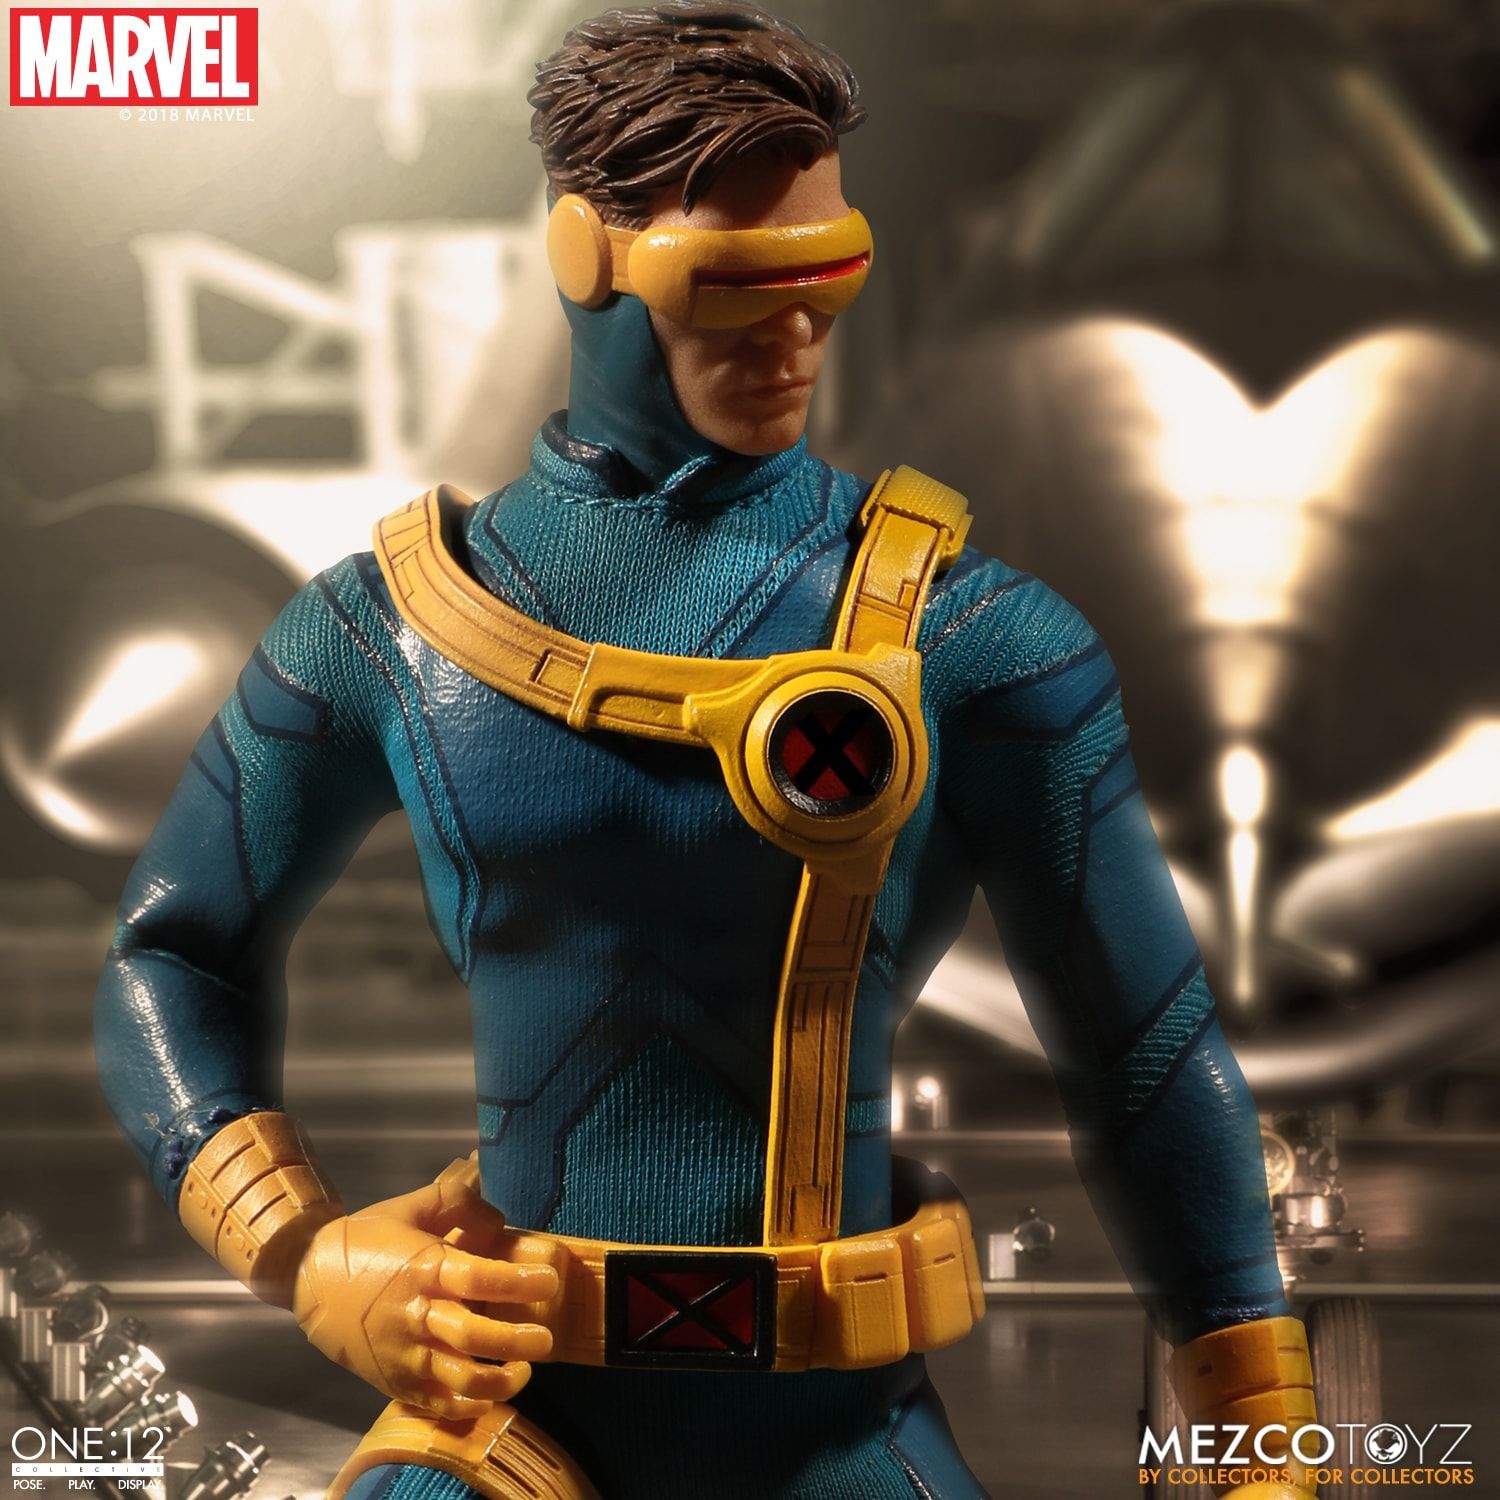 Mezco - One:12 Collective - Marvel - Cyclops - Marvelous Toys